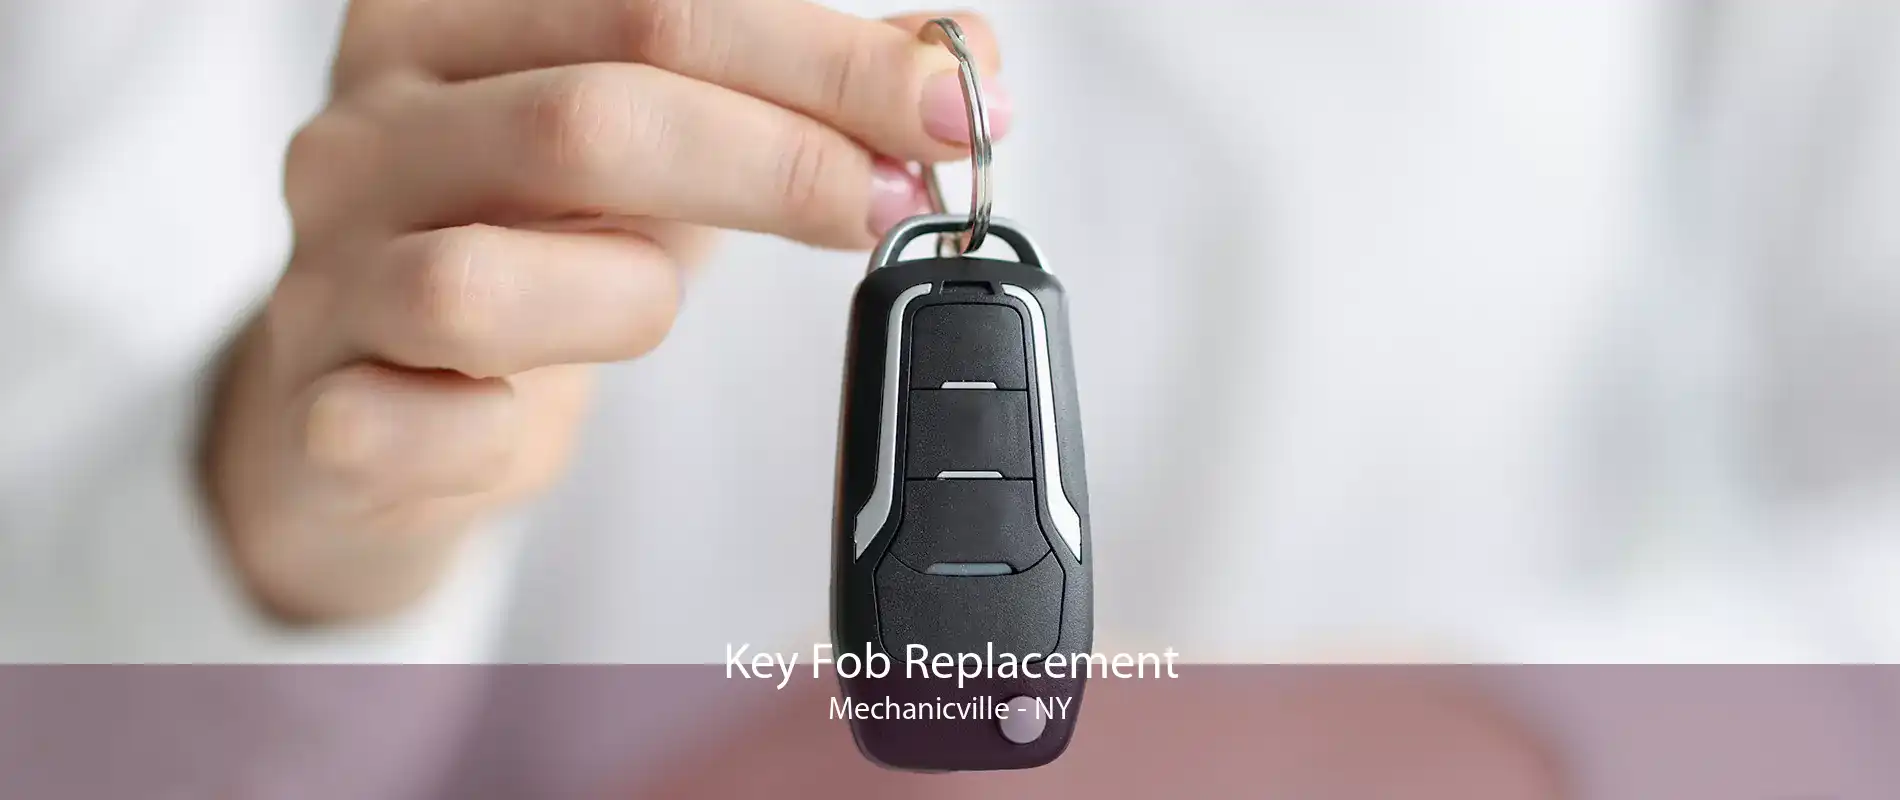 Key Fob Replacement Mechanicville - NY